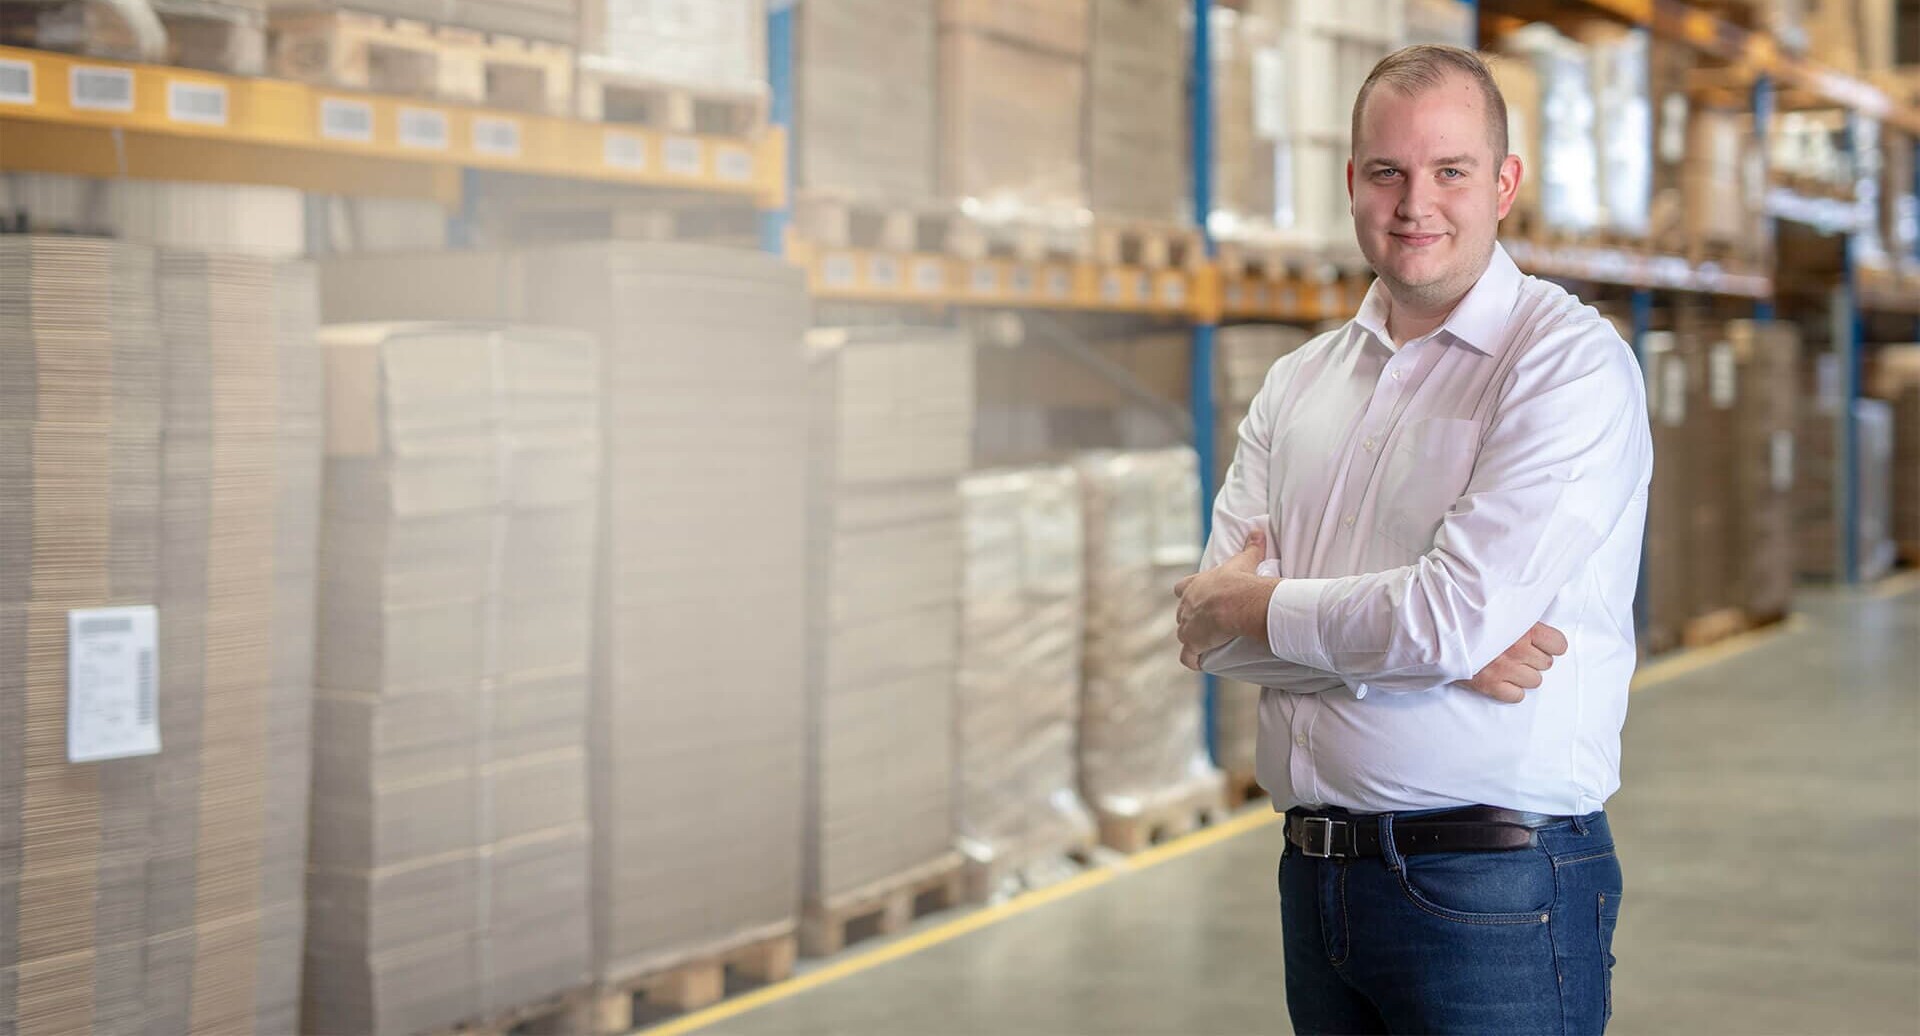 Our customer Mathias Baving, Authorised Officer/Head of Sales and Marketing Baving Verpackungstechnik GmbH & Co. KG